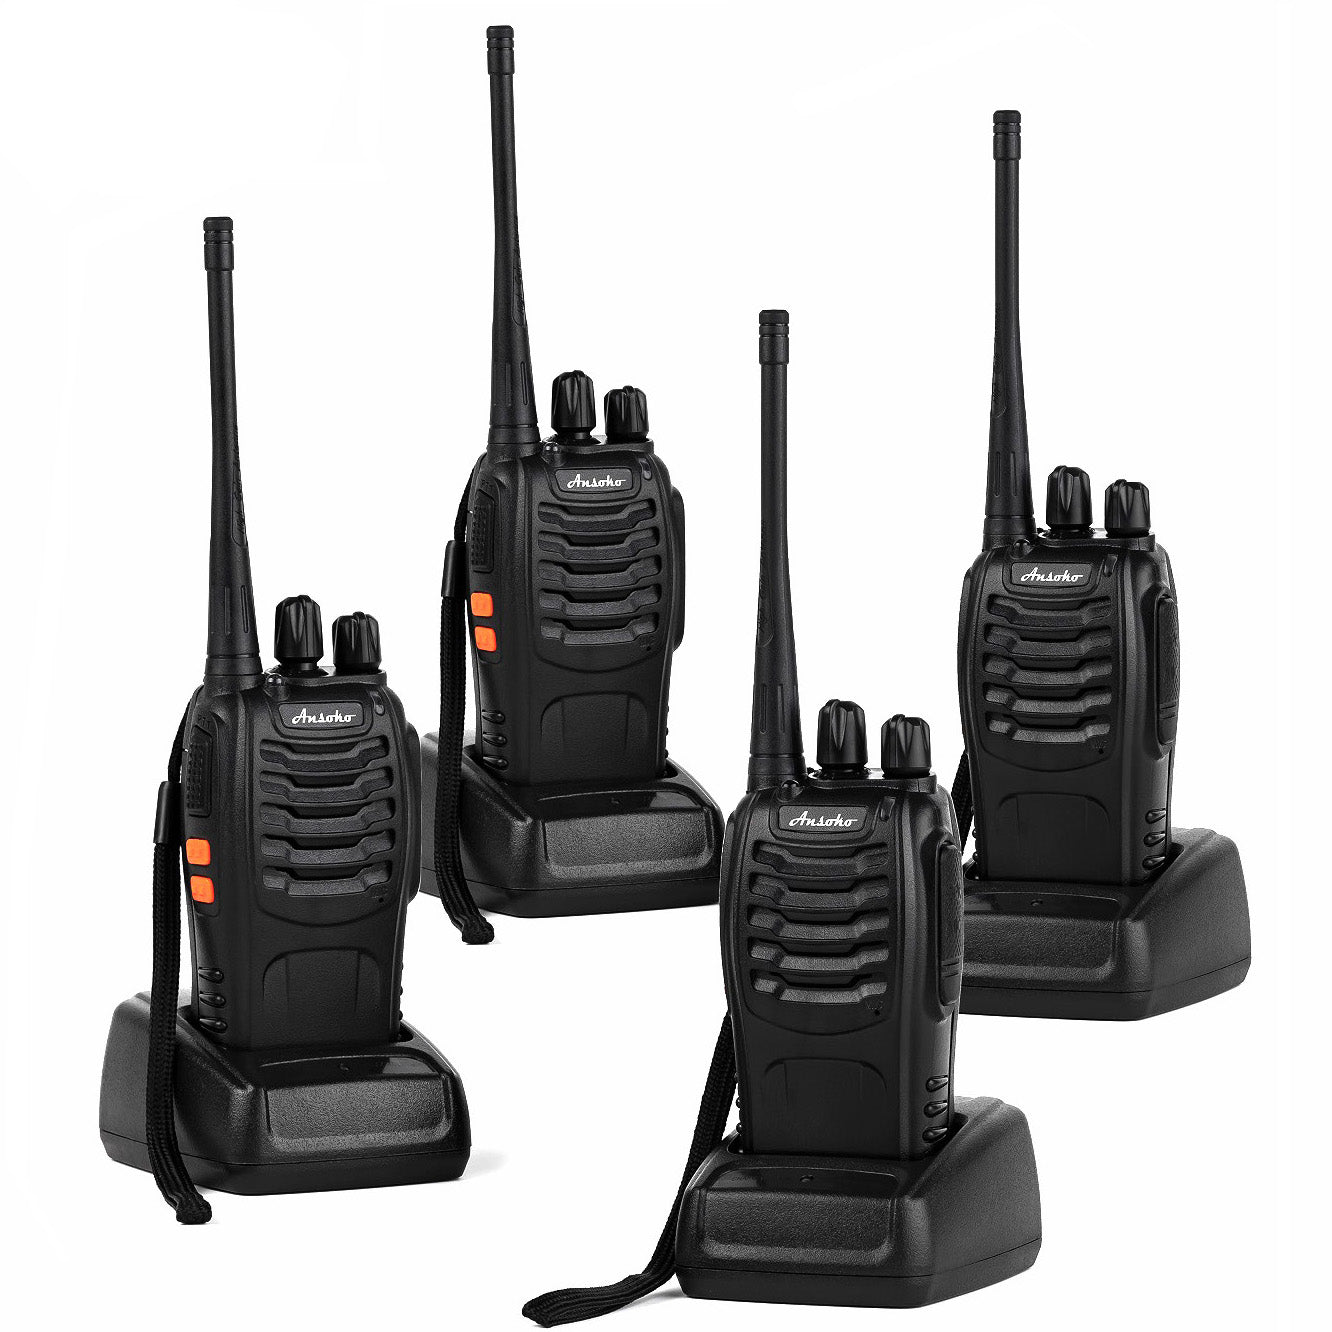 Arcshell Rechargeable Long Range Two-Way Radios with Earpiece Pack Arcshell AR-6 Walkie Talkies Li-ion Battery and Charger Included - 5